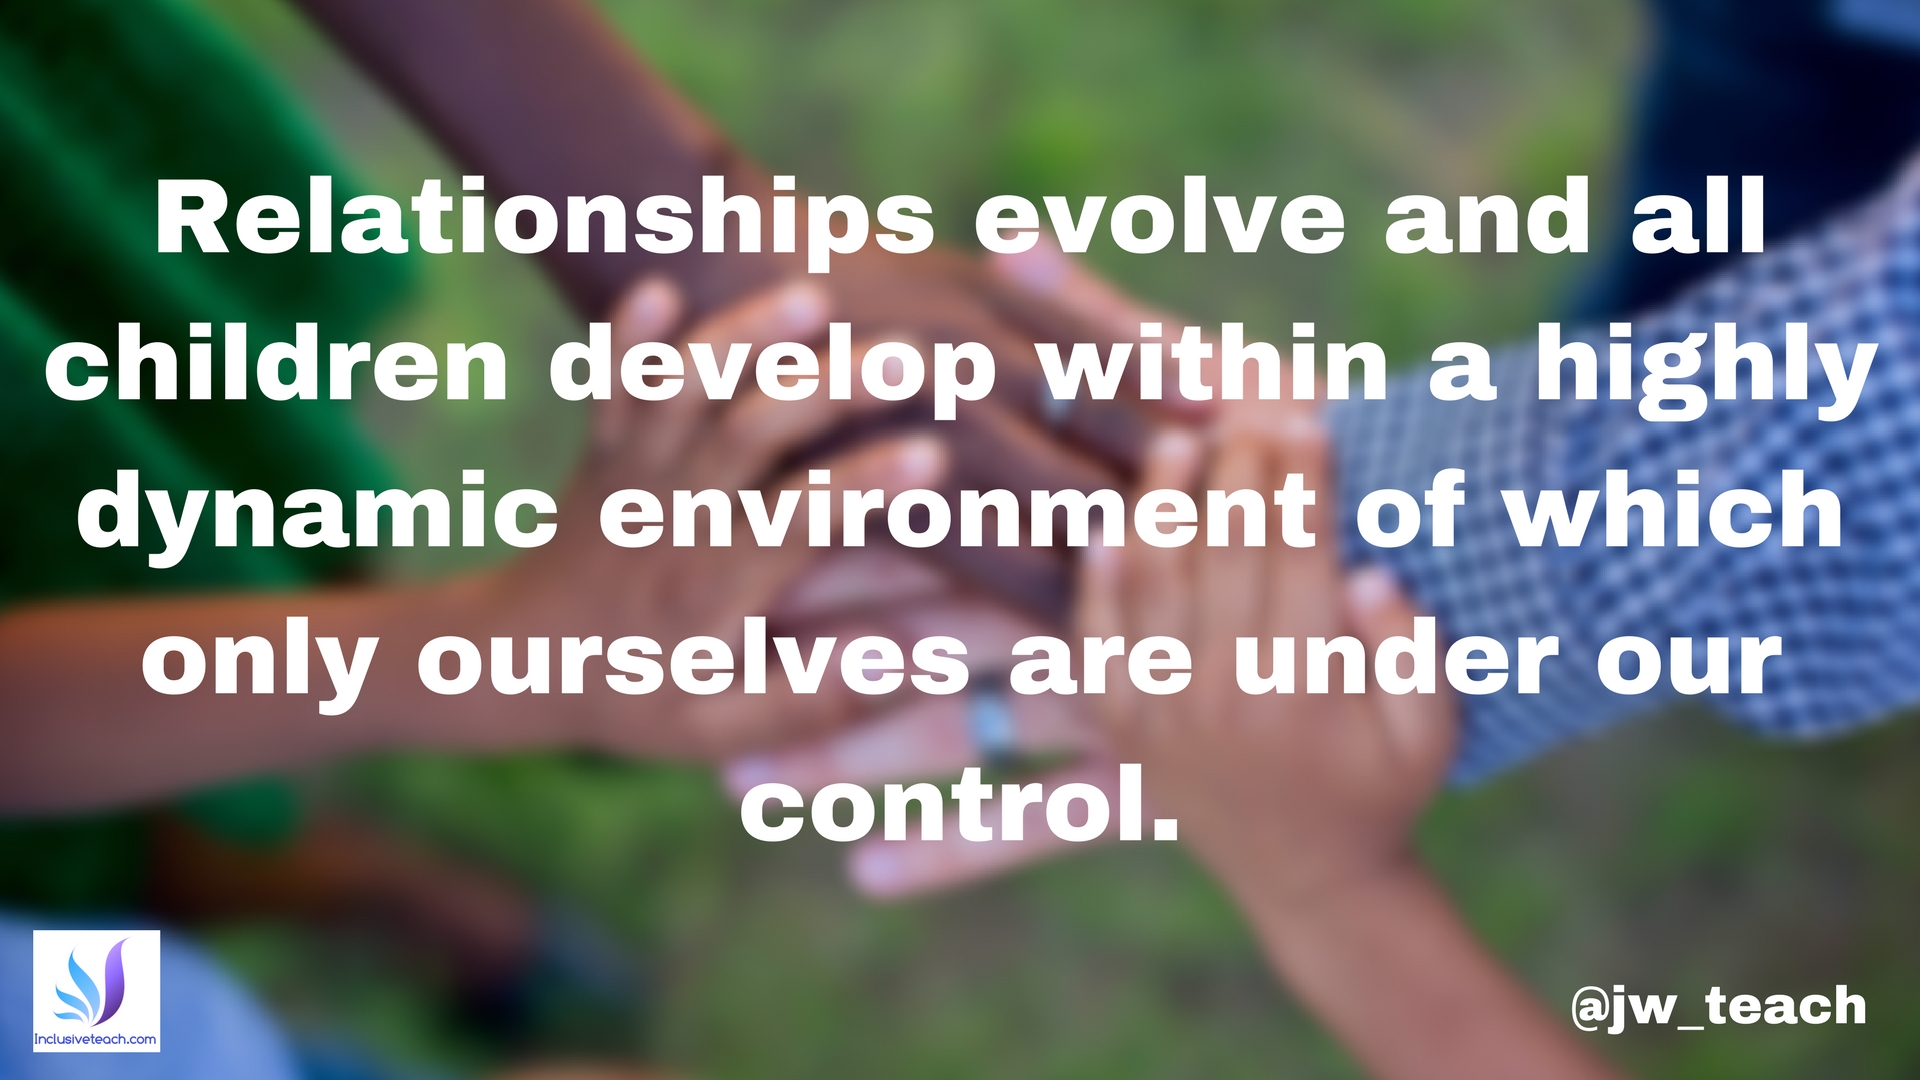 Relationships evolve and all children develop within a highly dynamic environment of which only ourselves are under our control. Special education quote